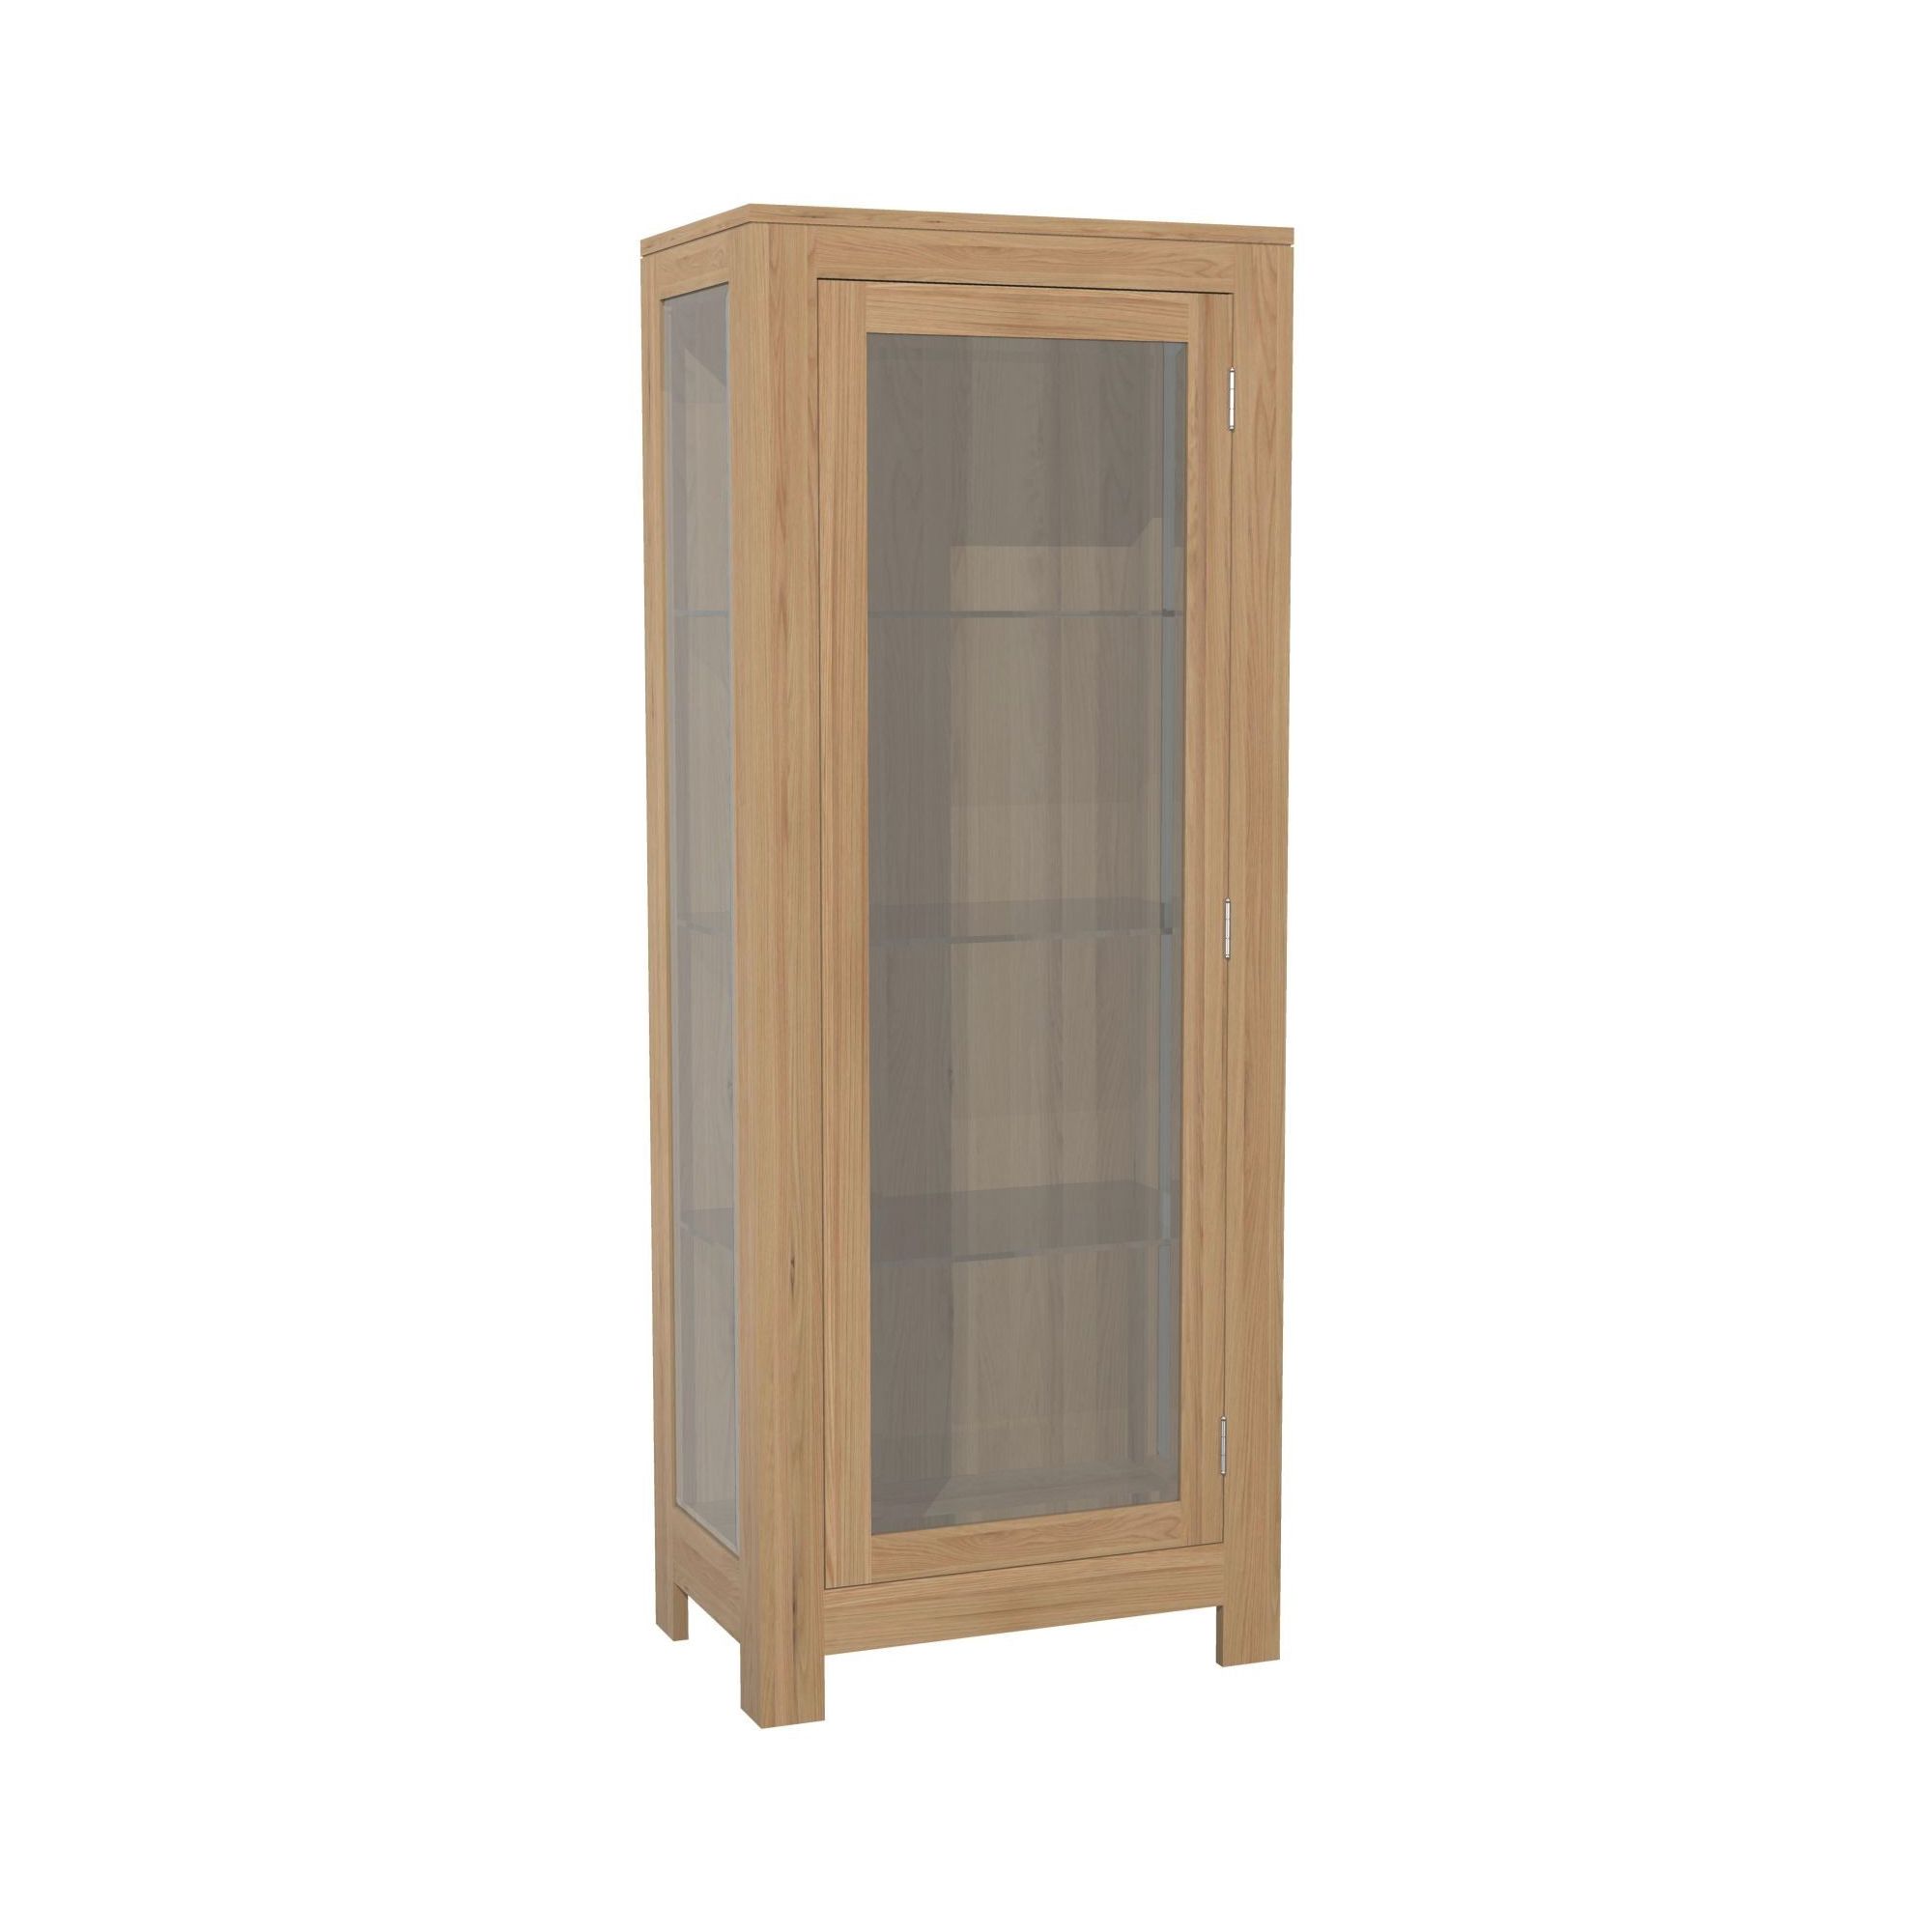 Kelburn Furniture Milano Display Cabinet in Clear Satin Lacquer at Tesco Direct